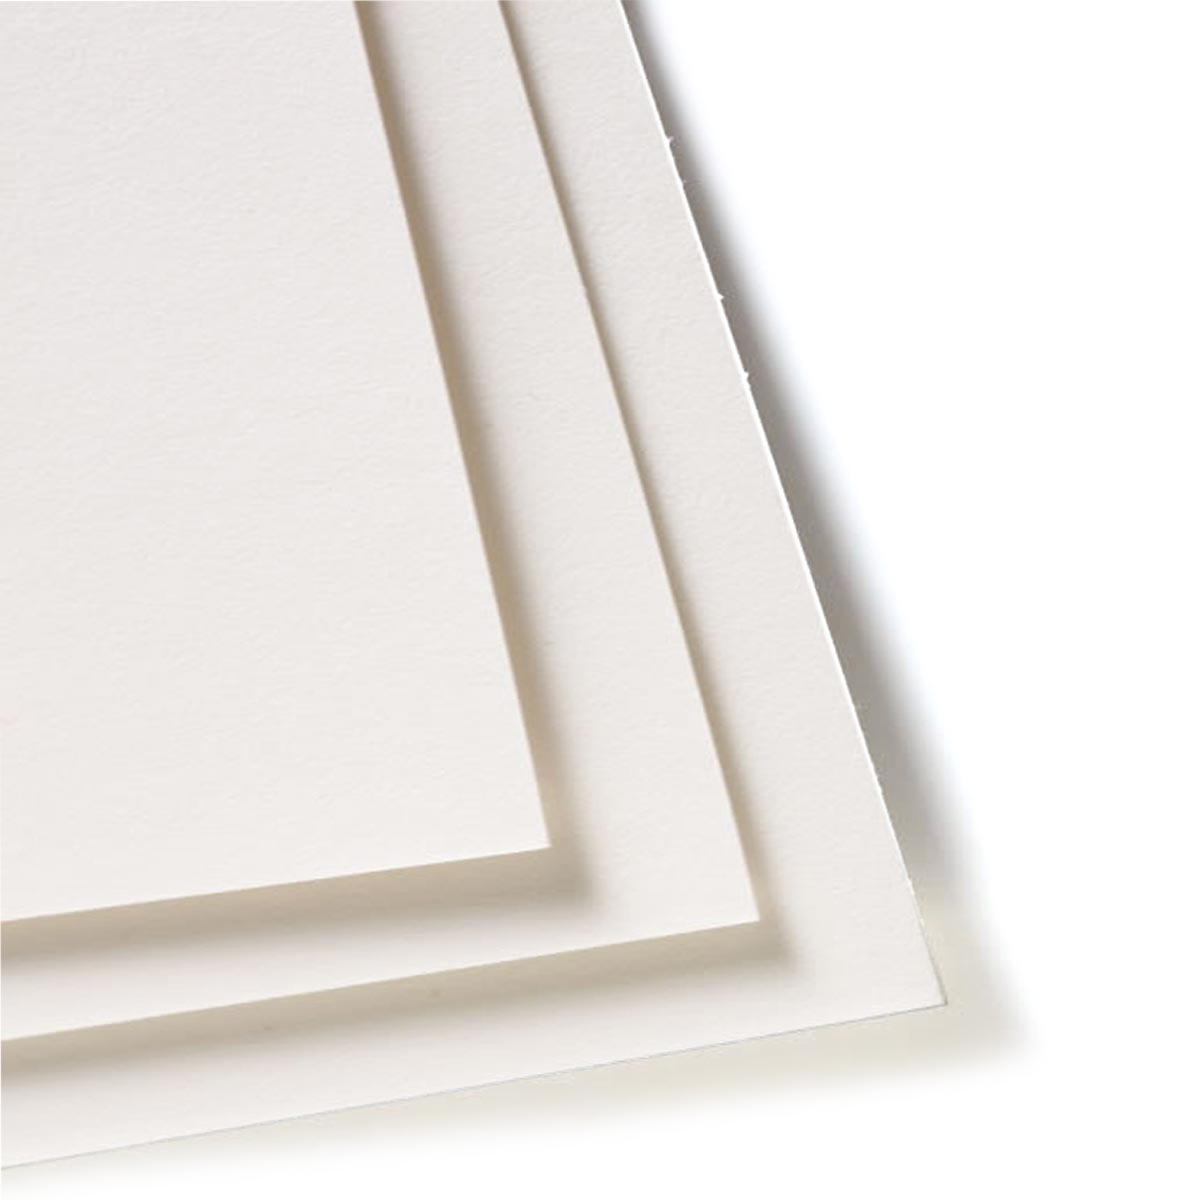 Clairefontaine Pastelmat Mounted Board - White 19.5 x 27.5 in (50x70cm)